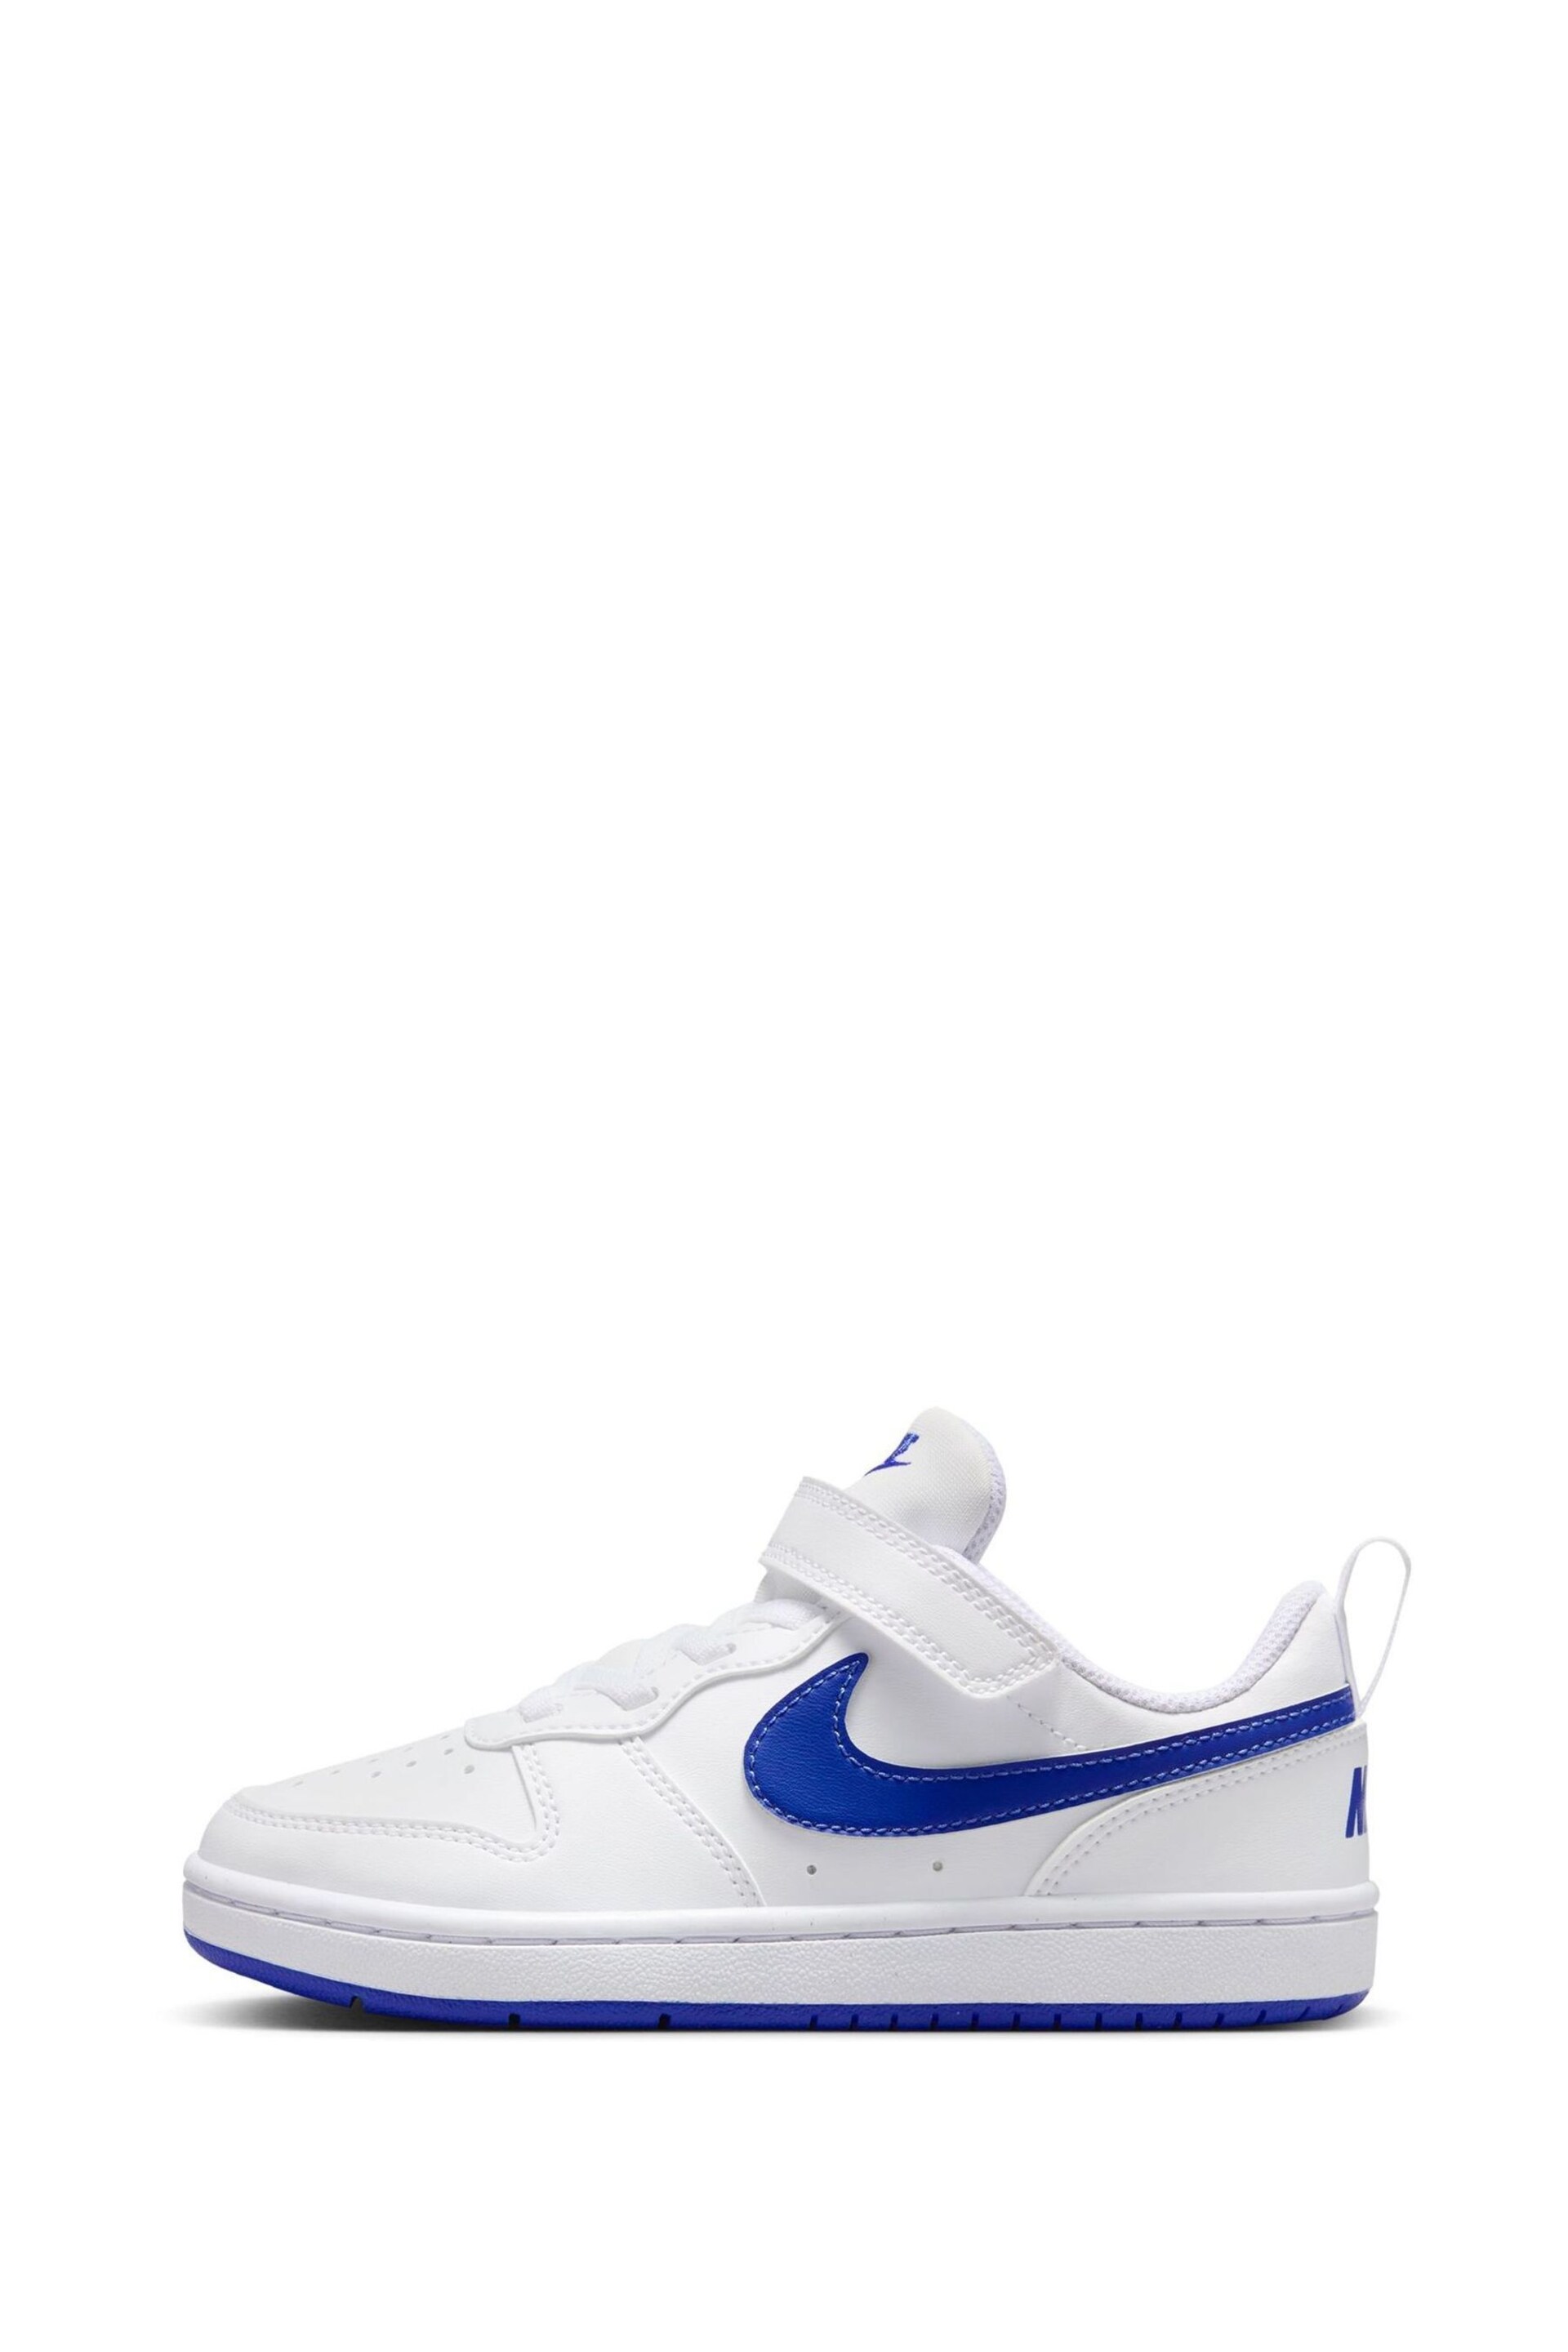 Nike White/Blue Junior Court Borough Low Recraft Trainers - Image 3 of 12